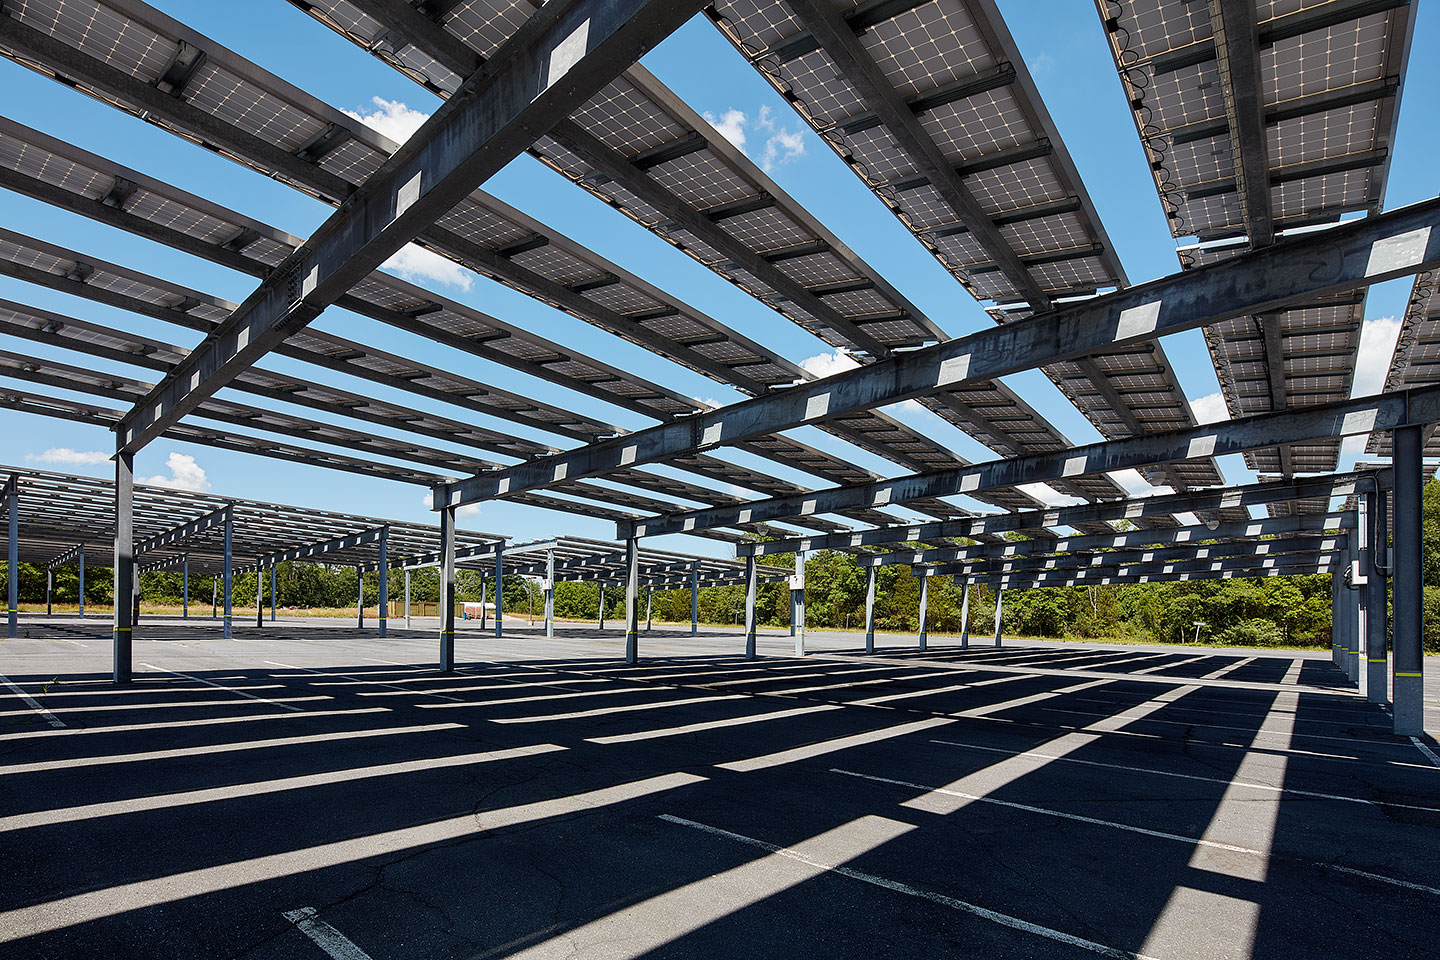 Solar arrays in a commuter parking lot provide shade and energy at Raritan Valley Community College. Branchburg, NJ. June, 2016.